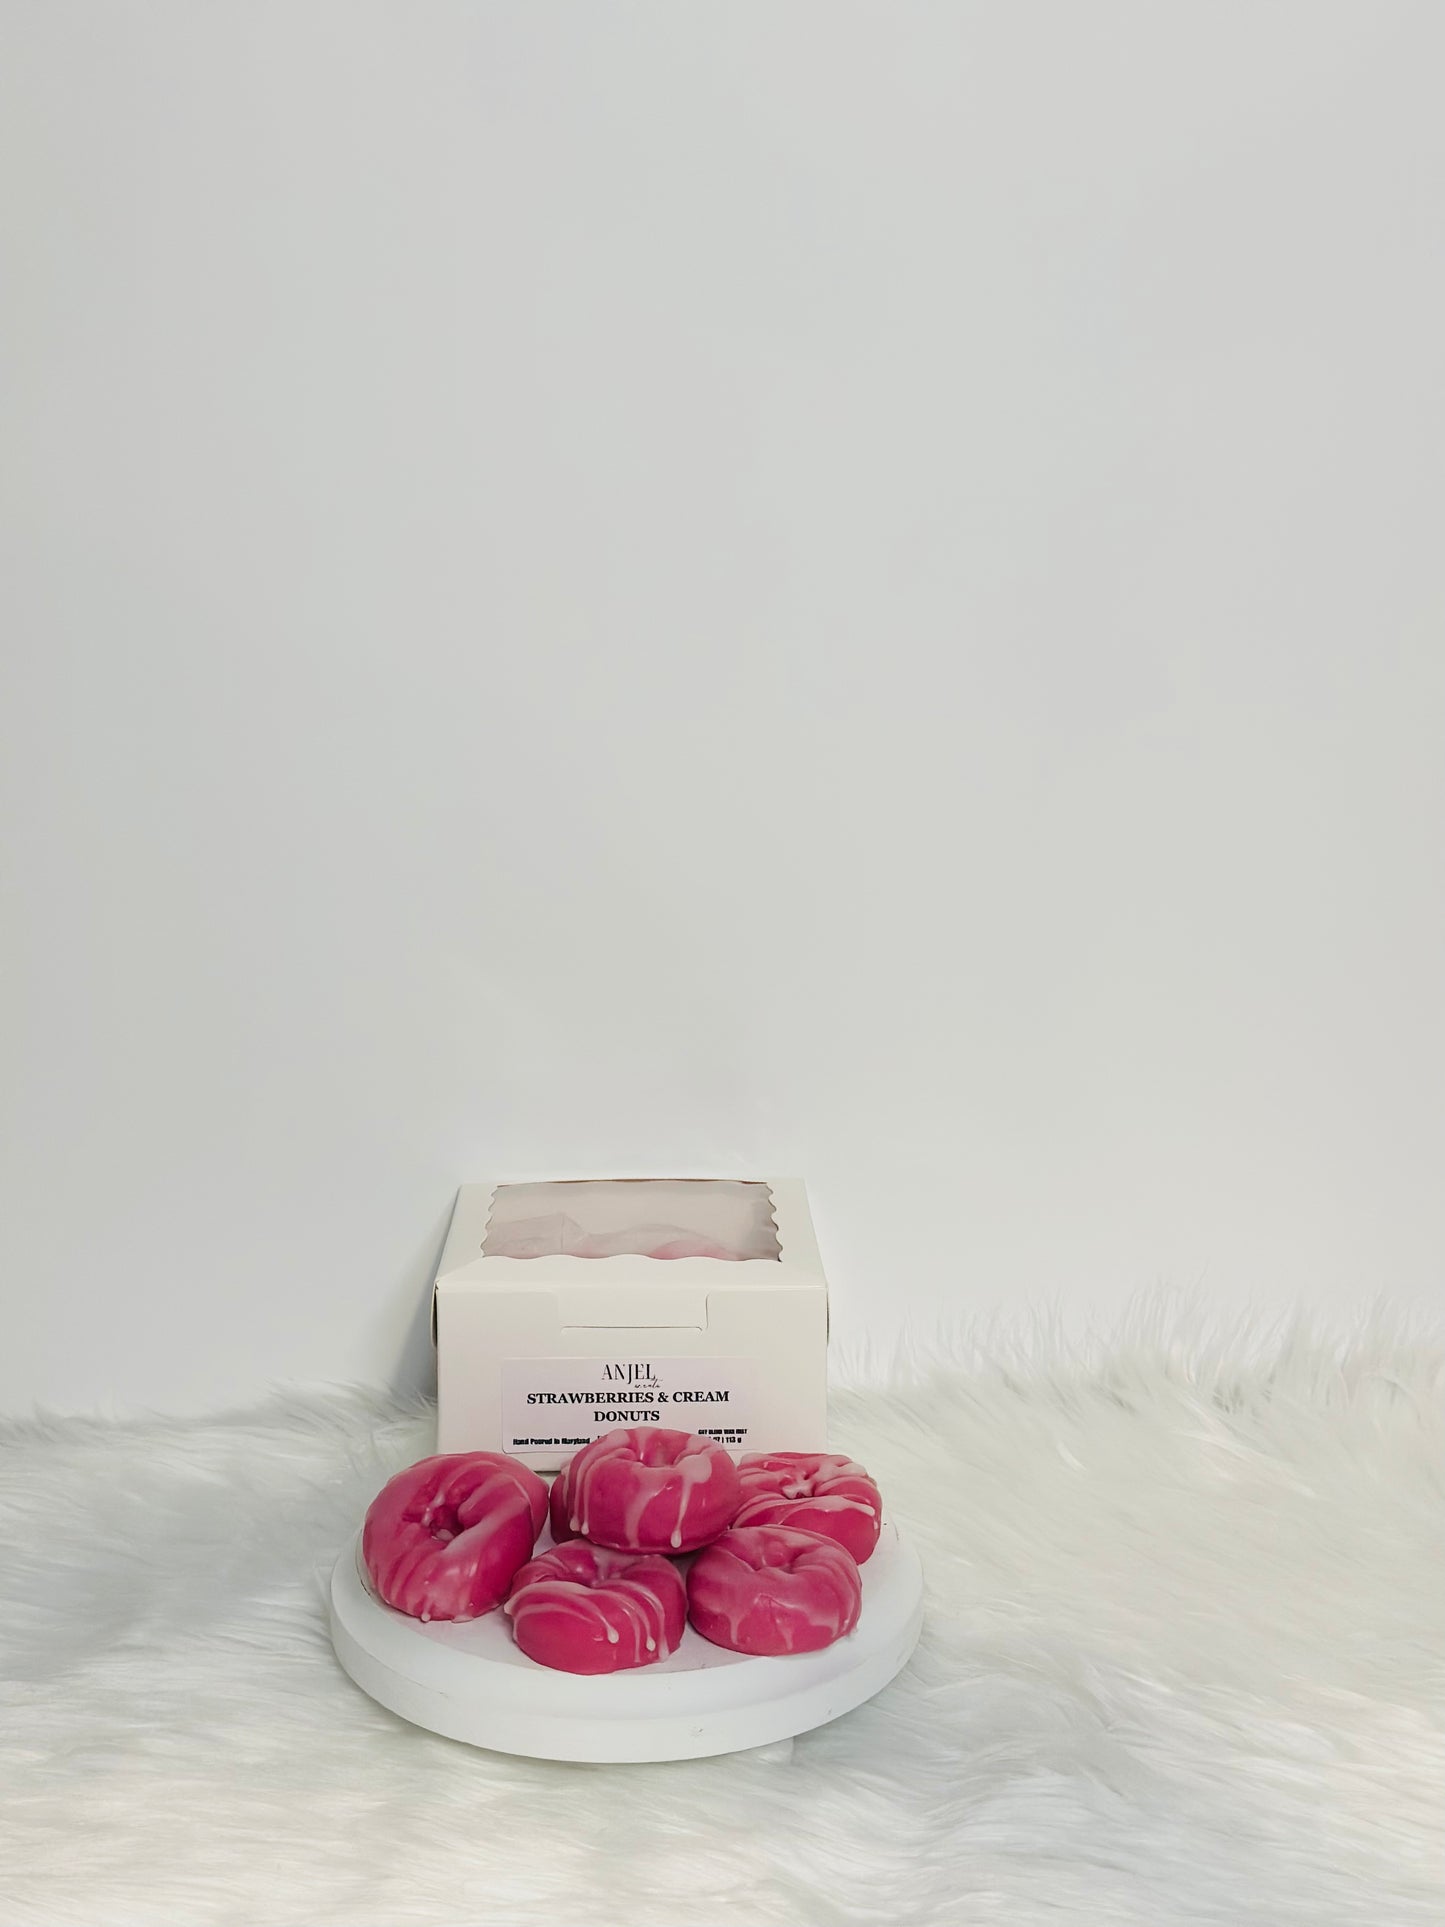 Strawberries and Cream Donut Wax Melts